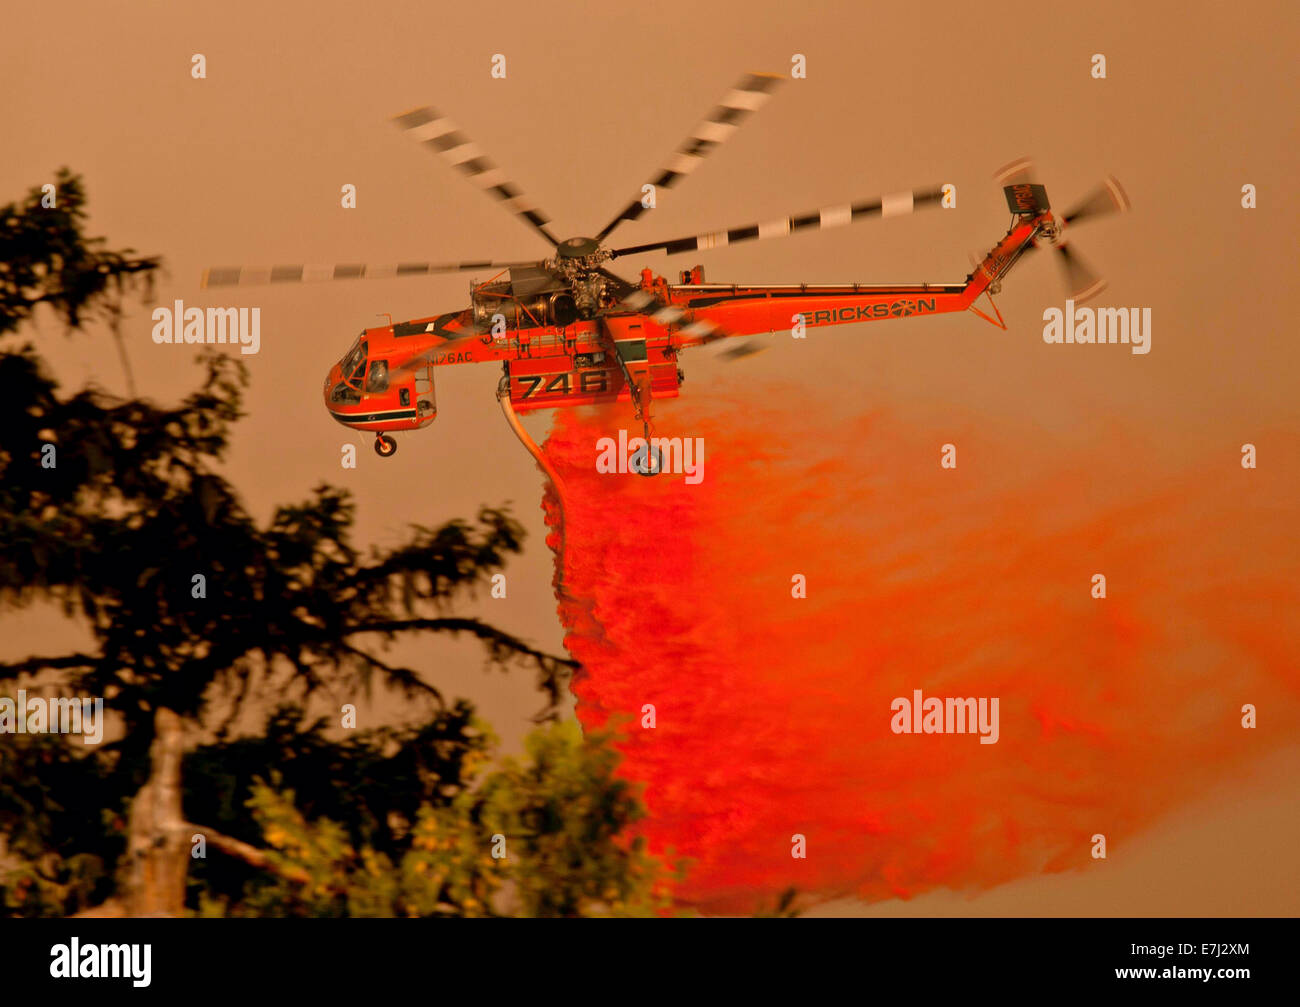 A S-64 Erickson Air-Crane helicopter drops fire retardant on the Happy Camp Complex Fire burning in the Klamath National Forest September 18, 2014 in Yreka, California. The fire has consumed 125,788 acres and is 68% contained. Stock Photo